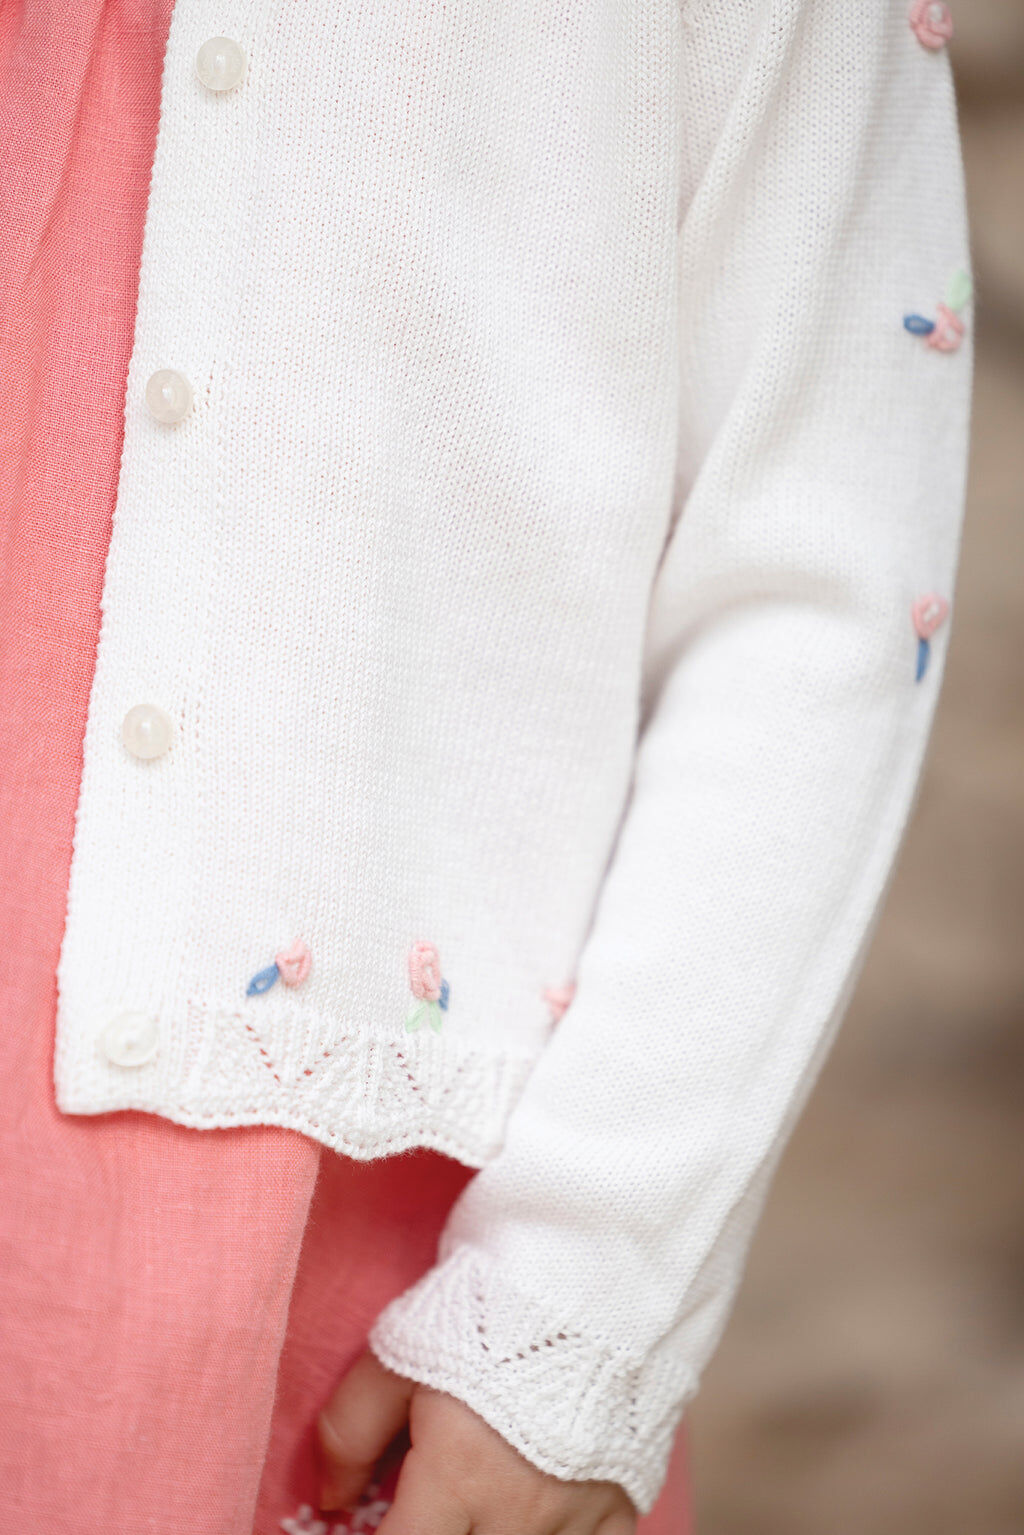 Cardigan - Mother-of-pearl Embrodery hand